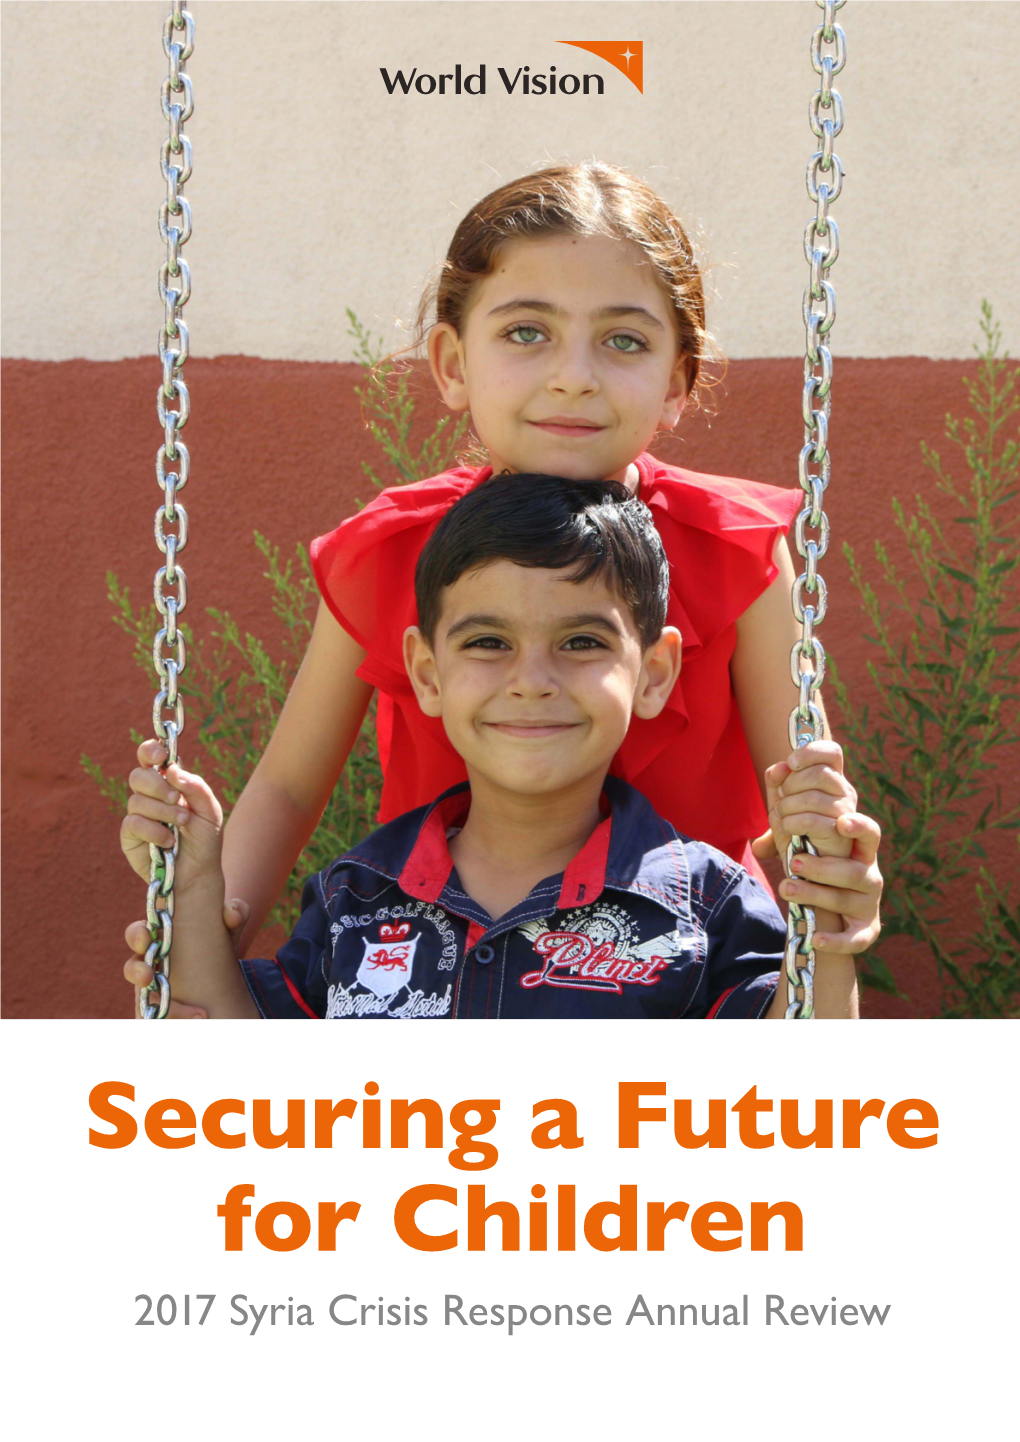 Securing a Future for Children 2017 Syria Crisis Response Annual Review 2017 Syria Crisis Response Report